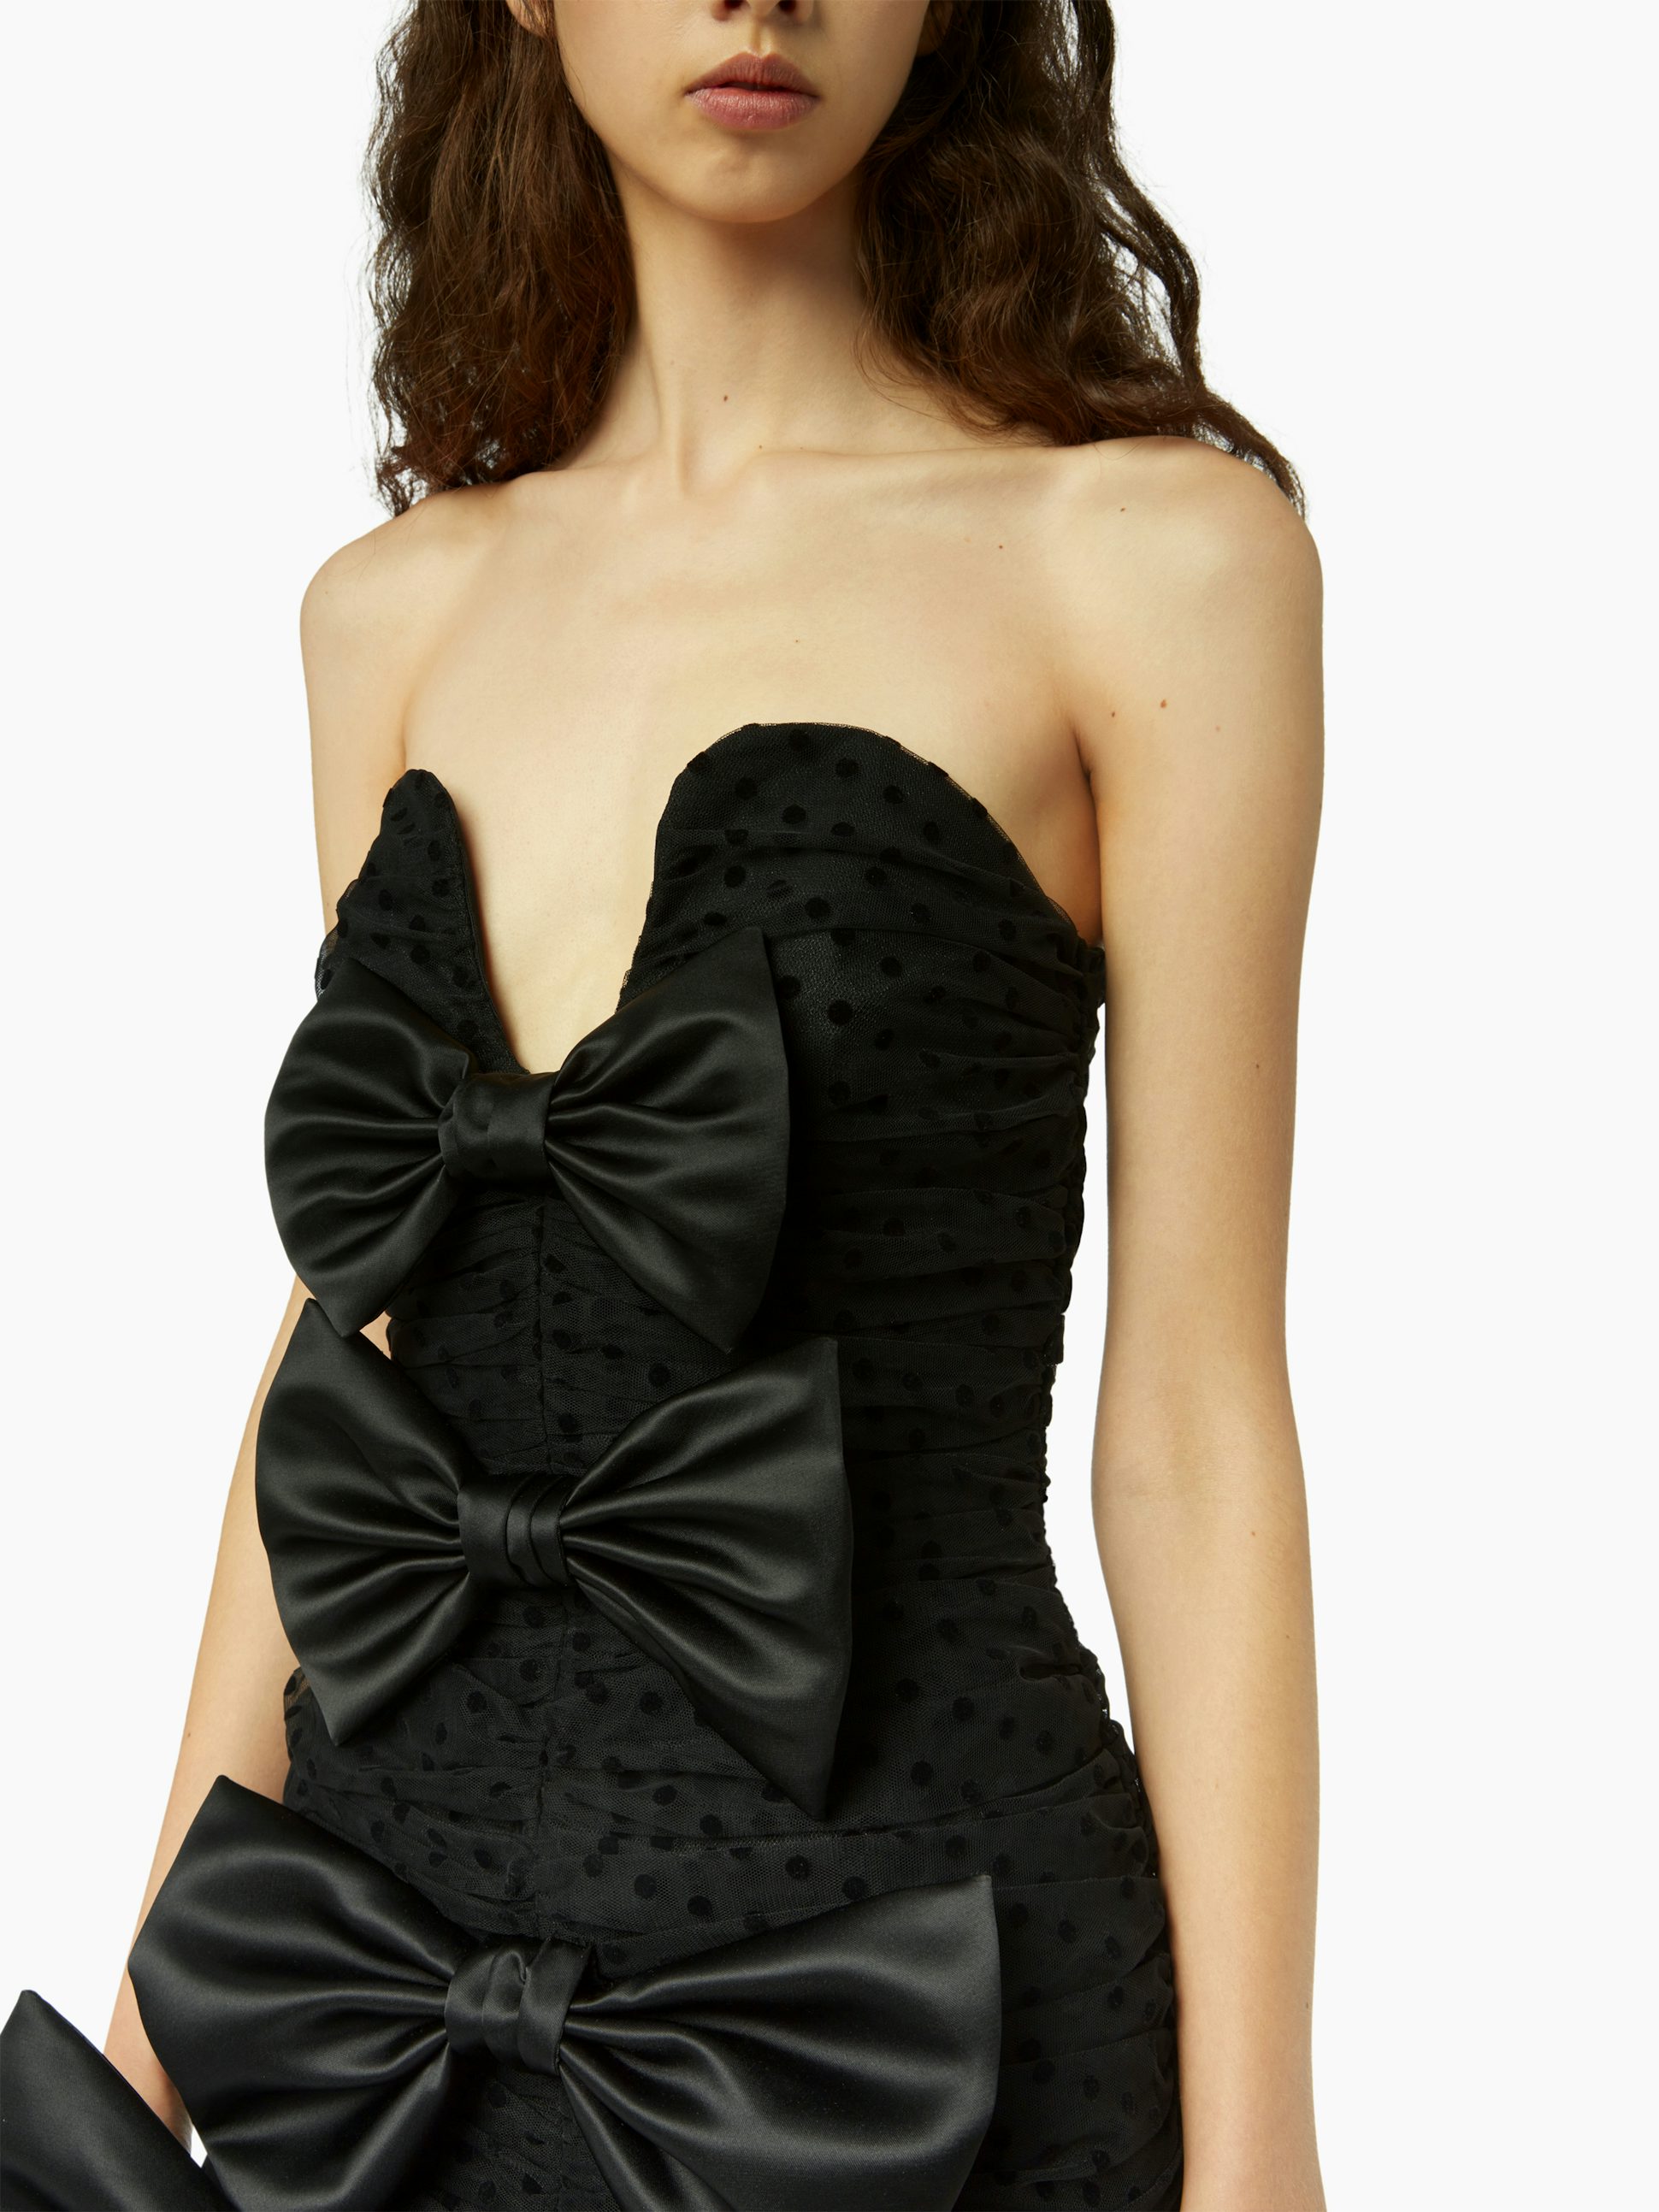 Bustier dress with bow details in black - Nina Ricci